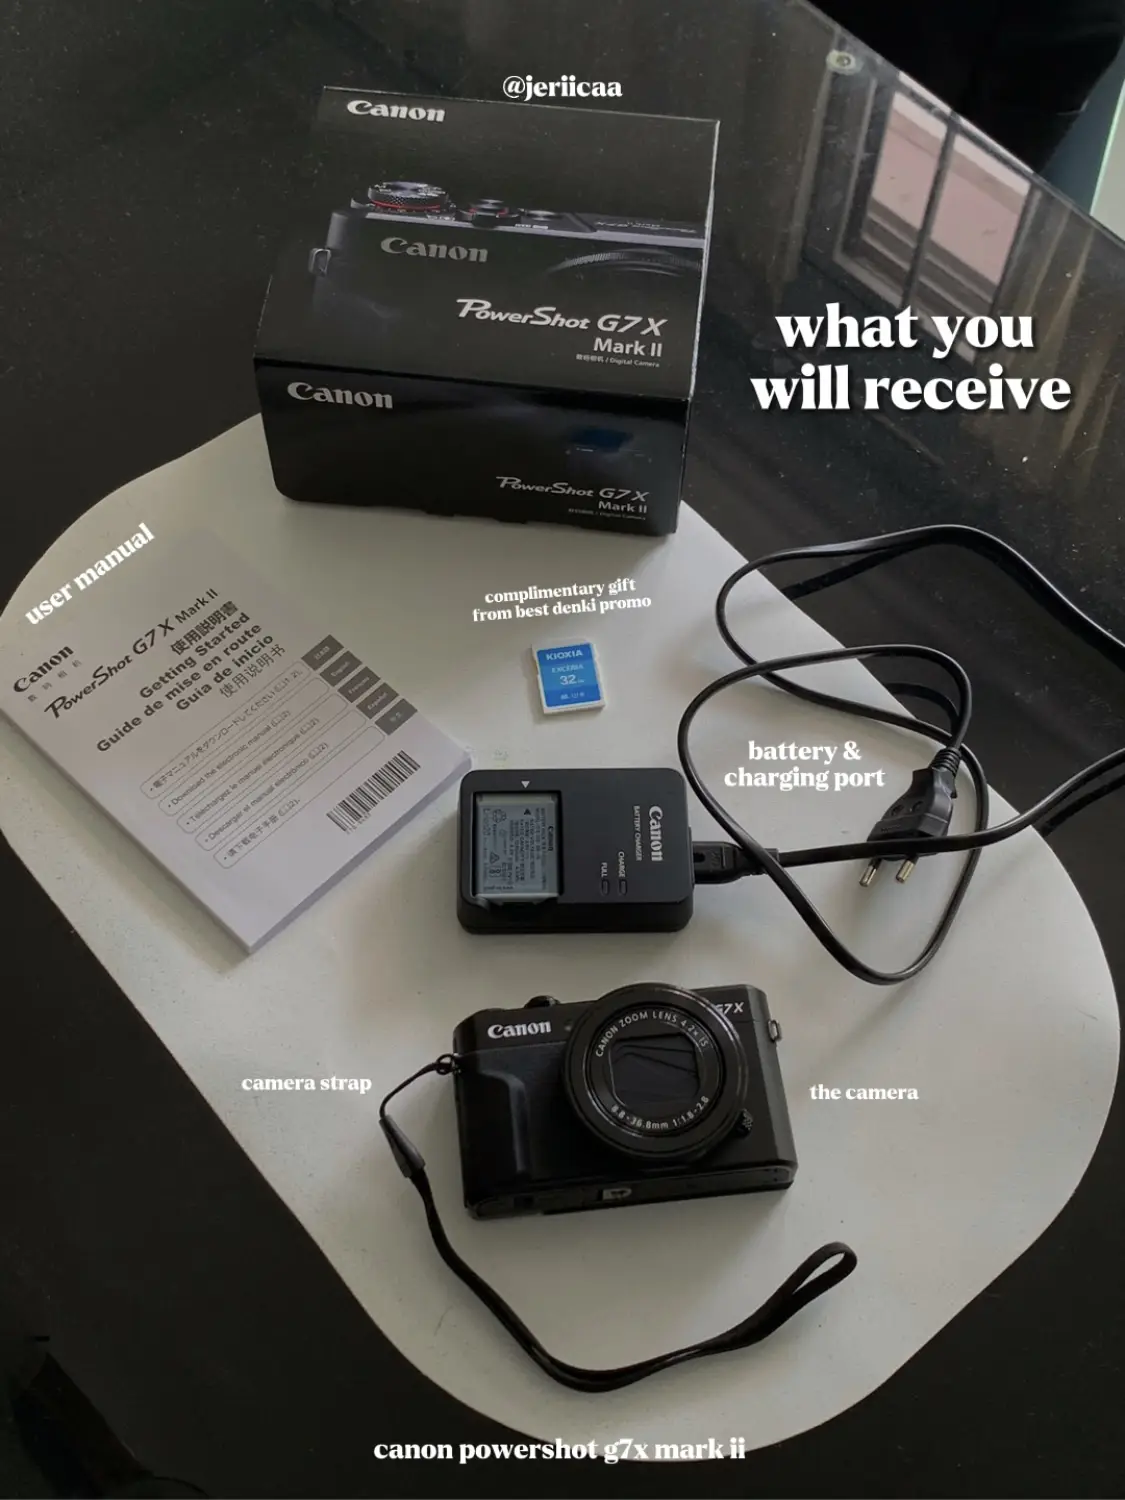 How to troubleshoot my Canon G7X? I have tried charging it via USB cable  with 2 different batteries and the light does not show it's charging. I do  not have the charging